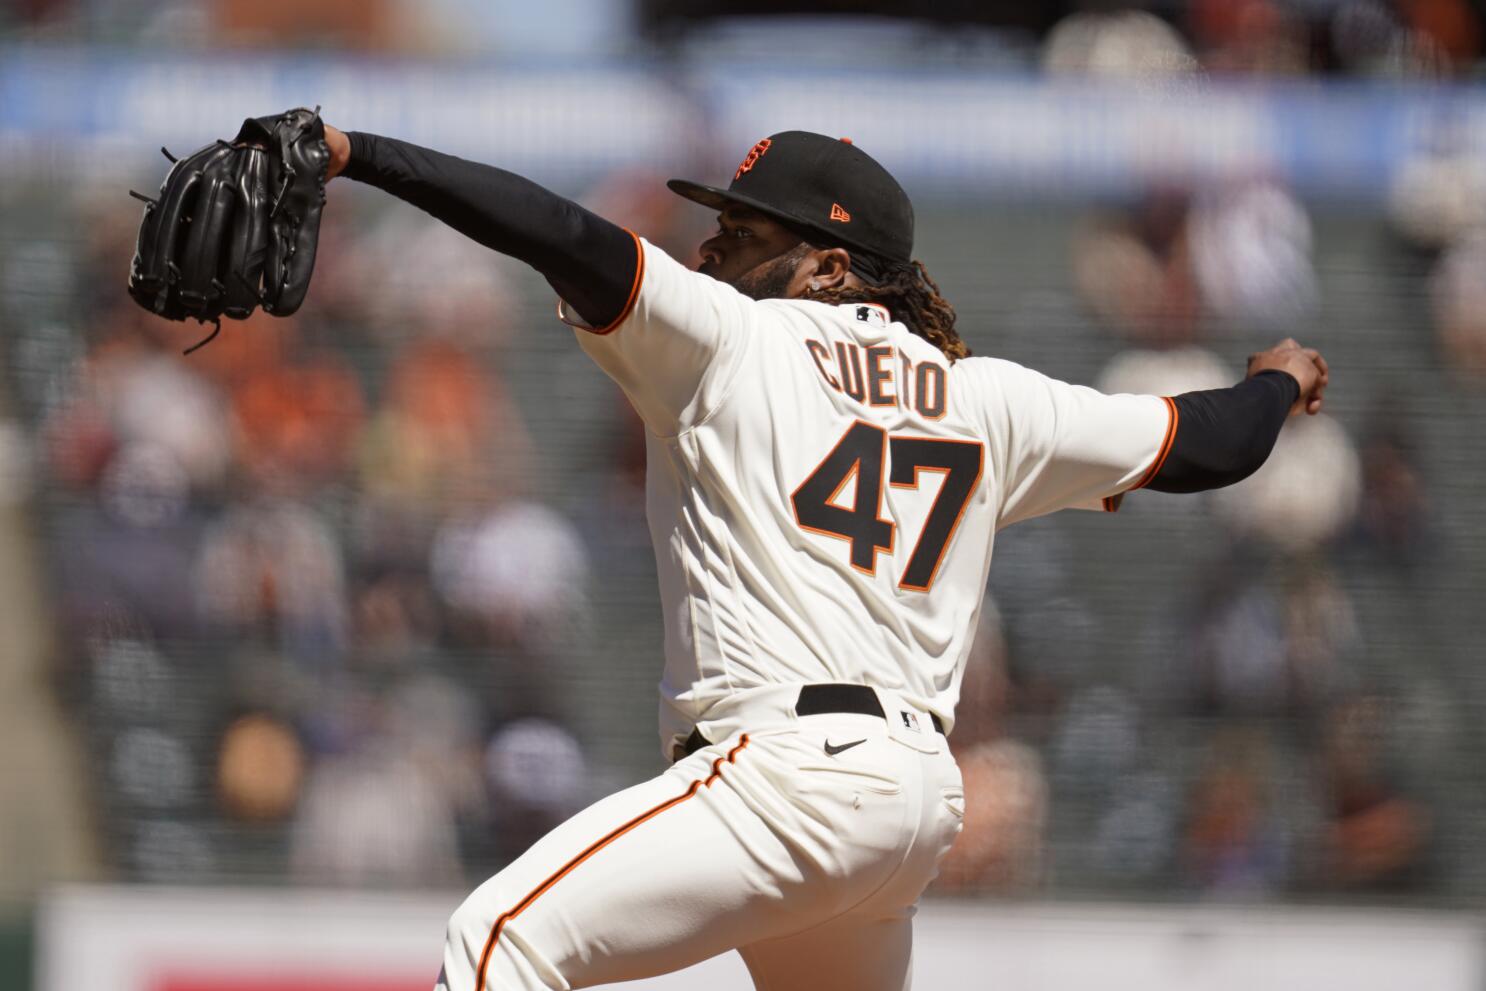 Johnny Cueto pitches Giants past Rockies 3-1 in home opener - The